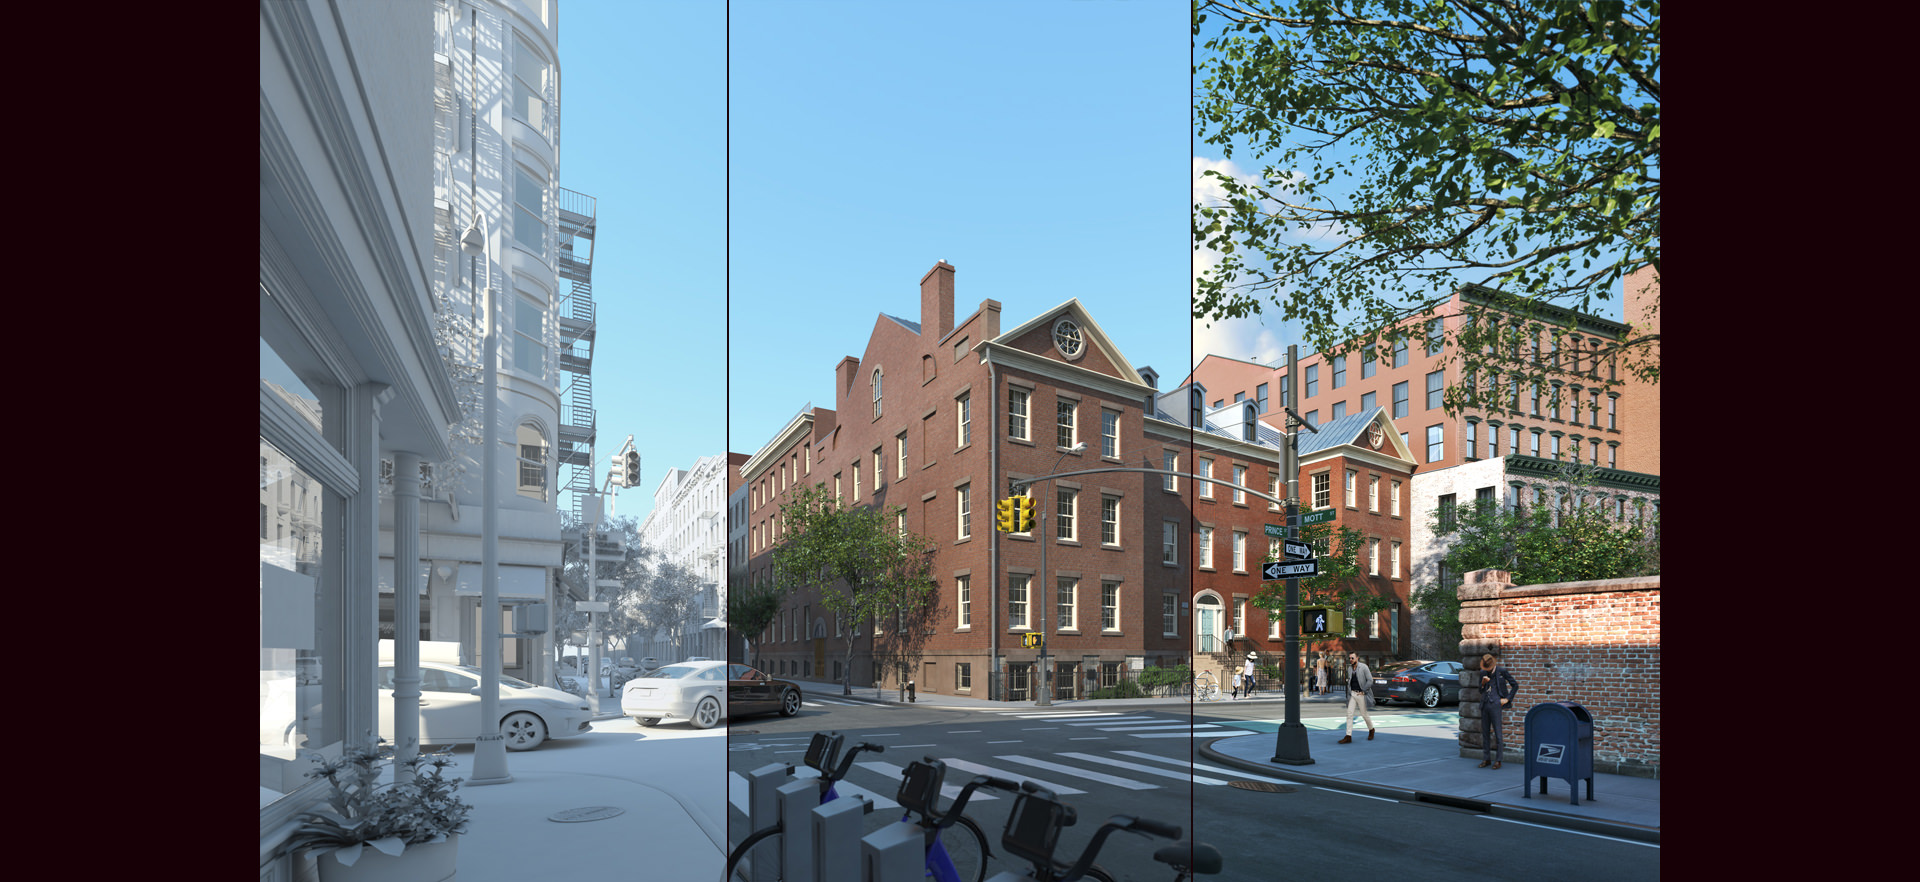 34 Prince St. / 2020 Full Image Progression (left to right: Geometry, Raw Render, Final)